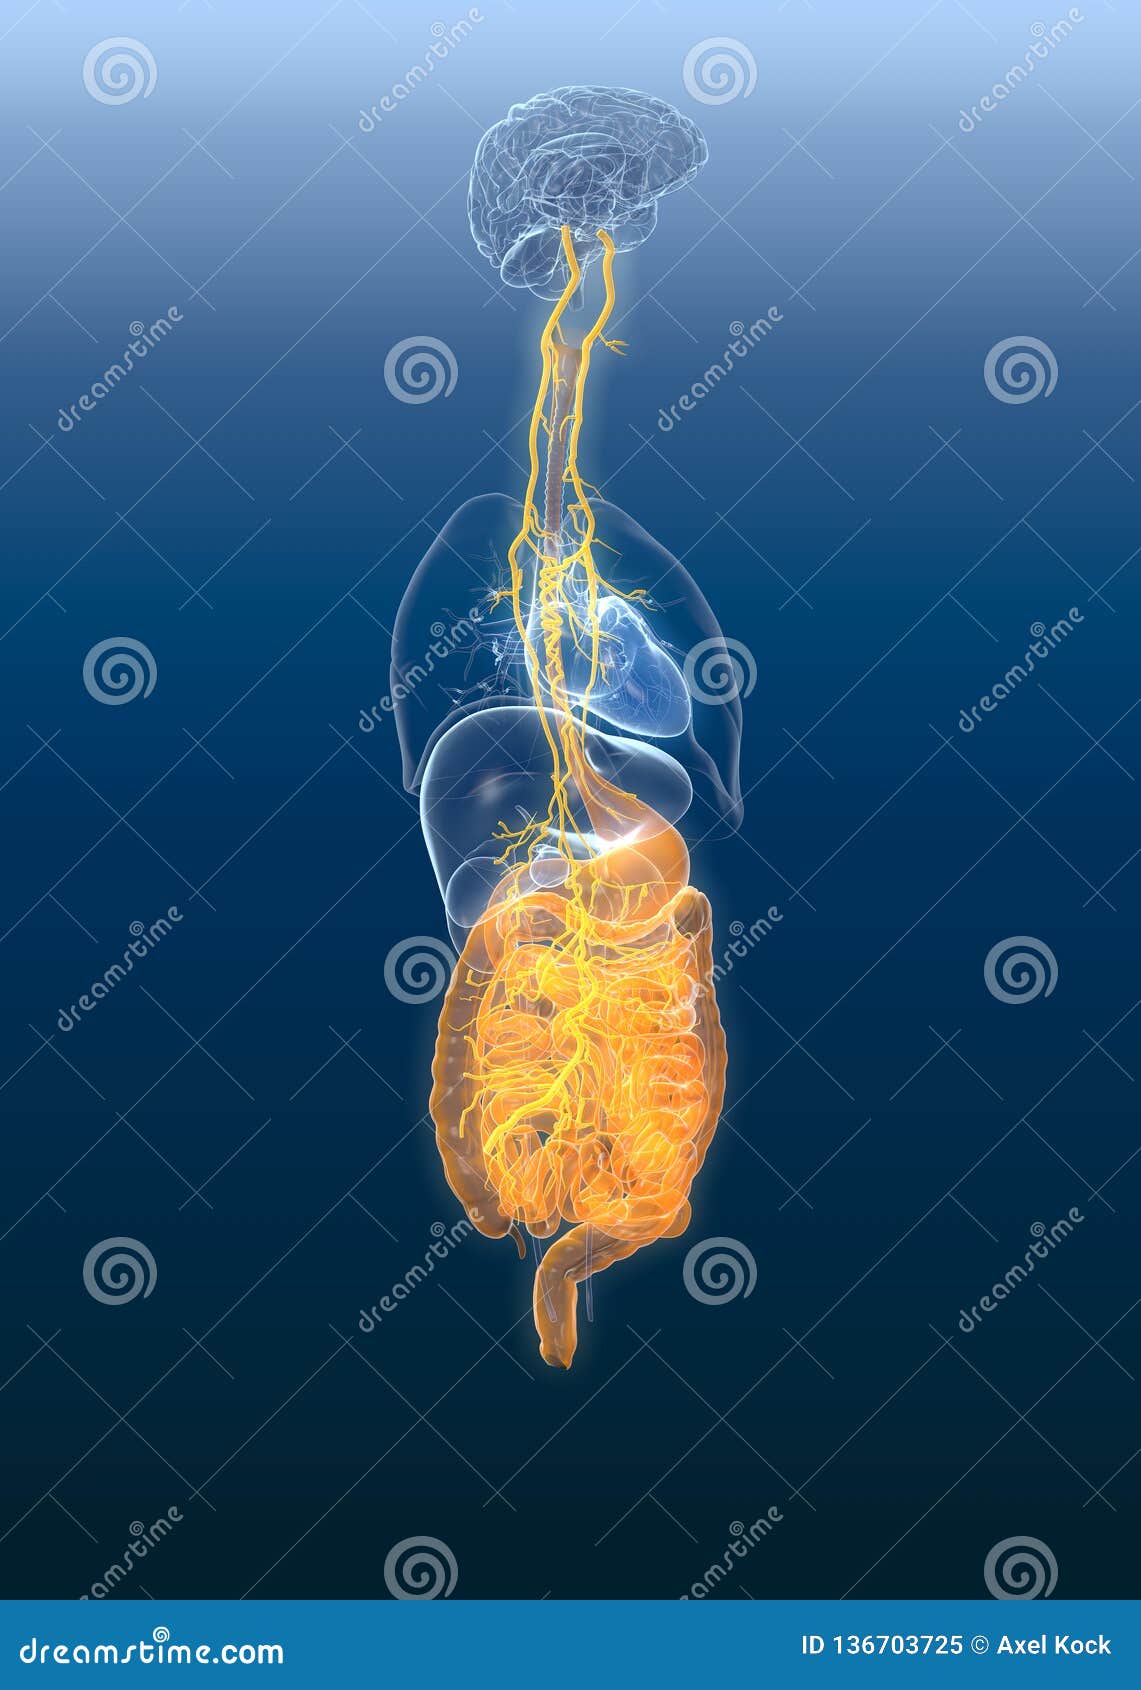 vagus nerve with painul stomach and digestive system, 3d medically 